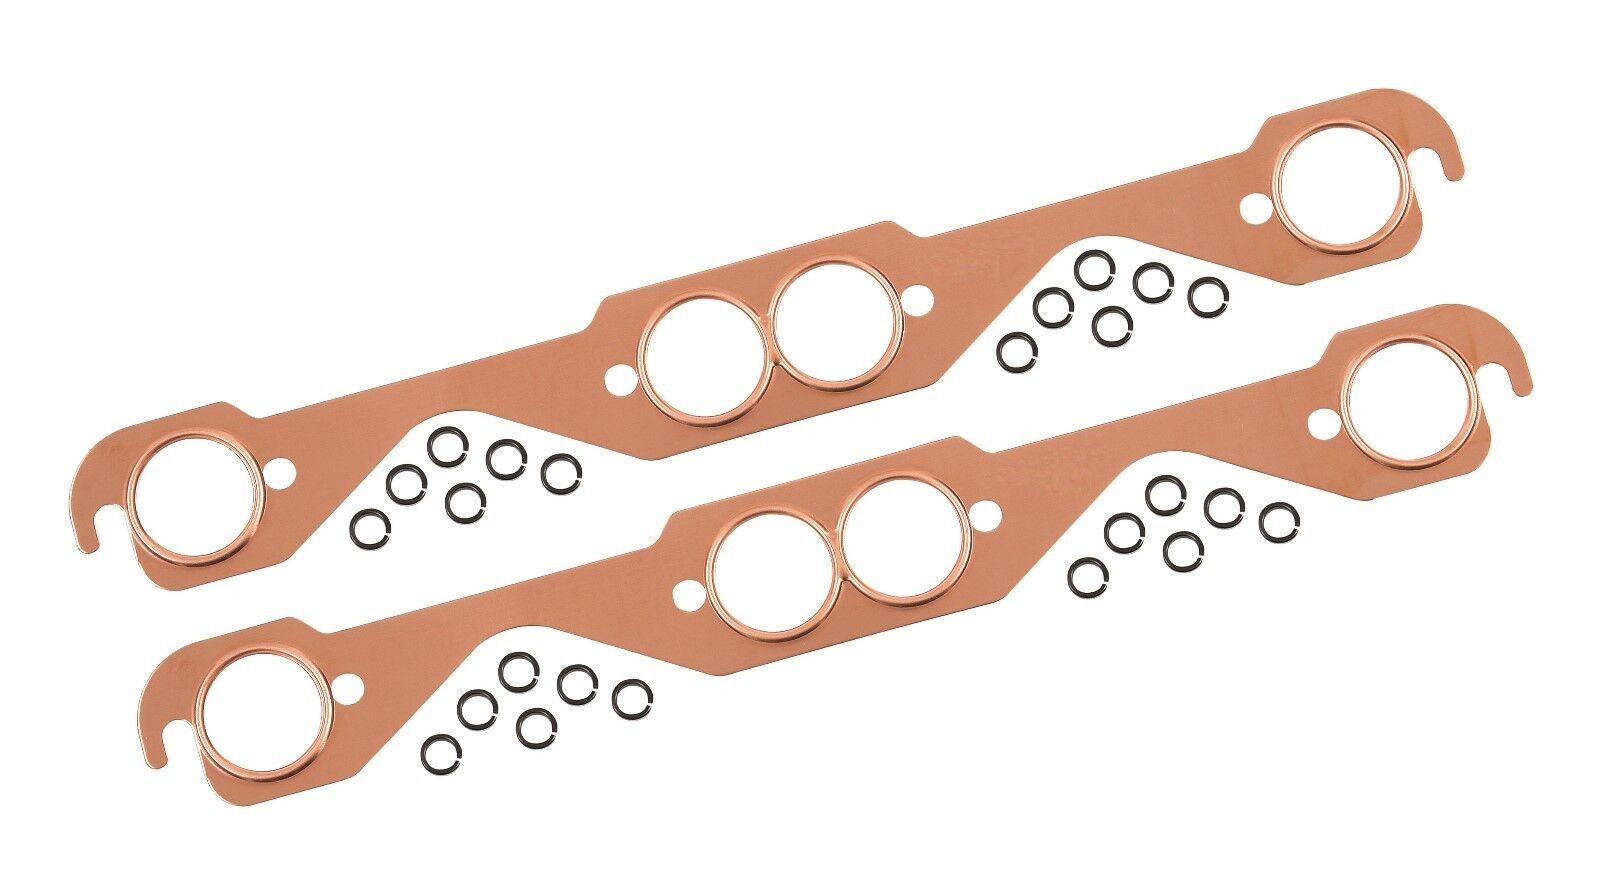 MAXX 152 Copper Exhaust Header Gaskets 55-99 Small Block Chevy V8 Round Port SBC